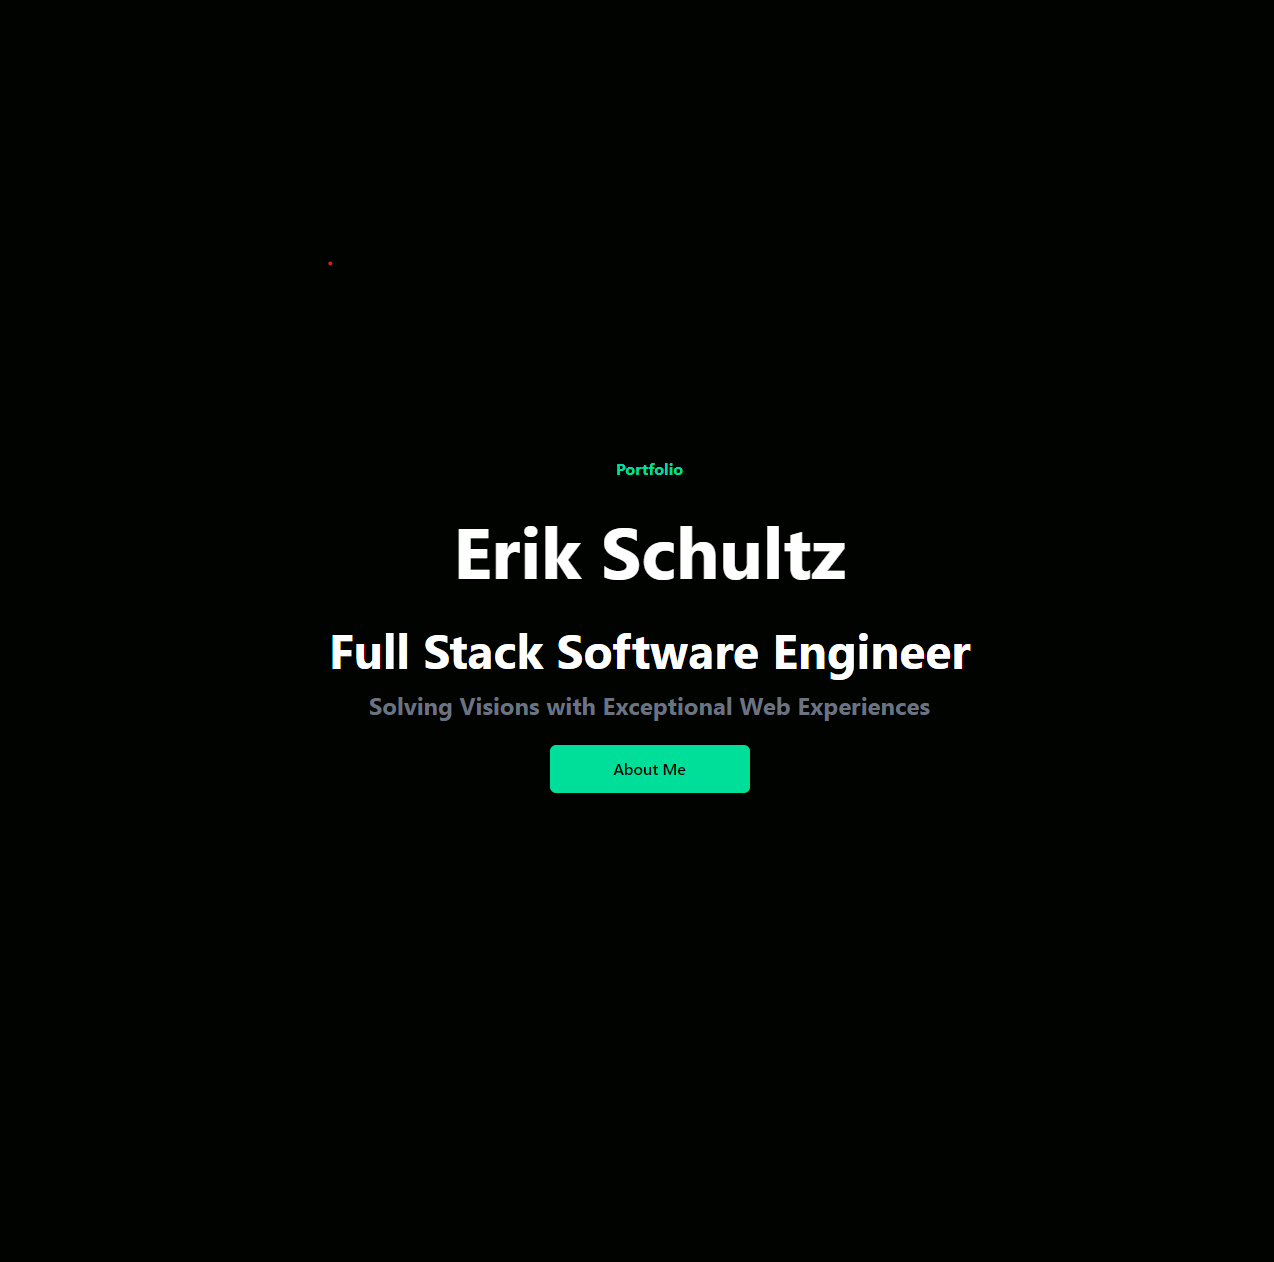 Portfolio

Erik Schultz

Full Stack Software Engineer

Solving Visions with Exceptional Web Experiences